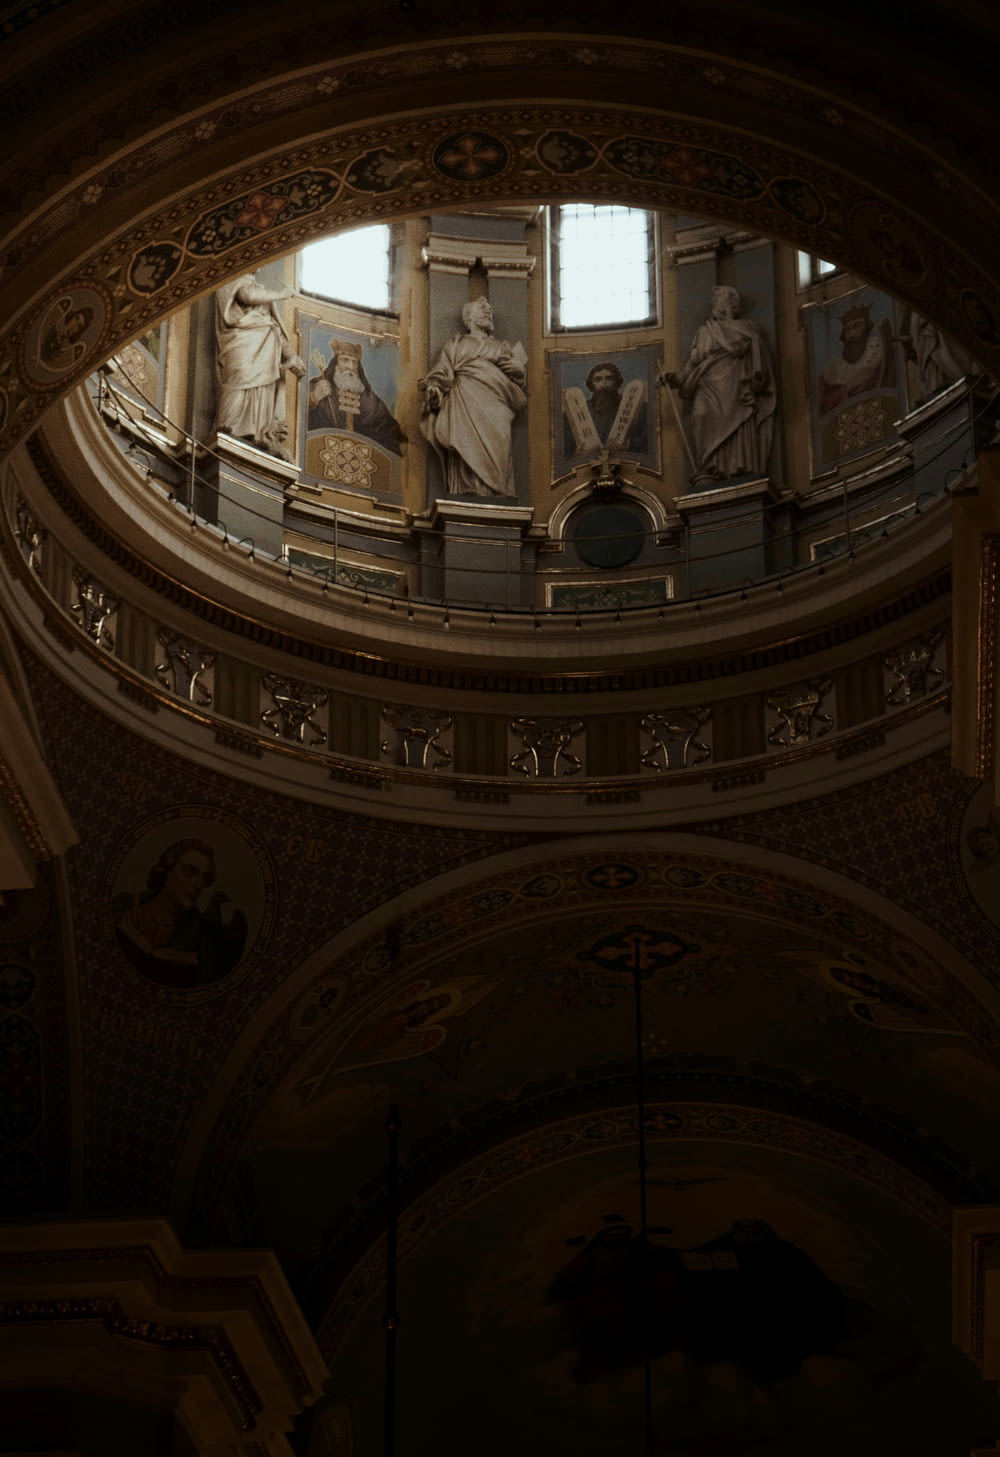 the ceiling of a large building with statues on it